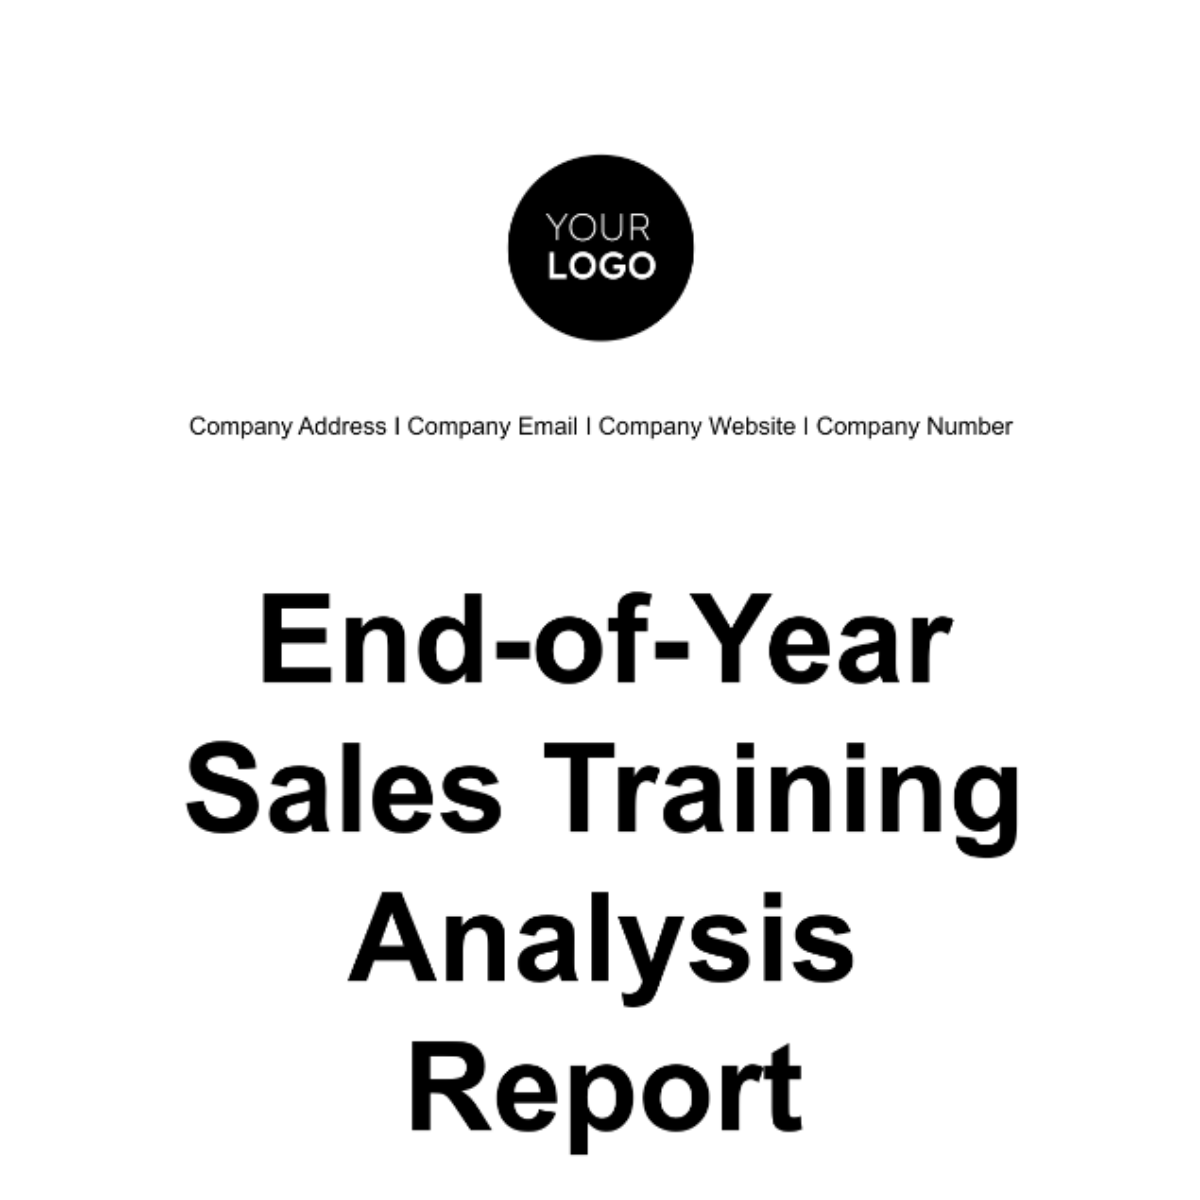 End-of-Year Sales Training Analysis Report Template